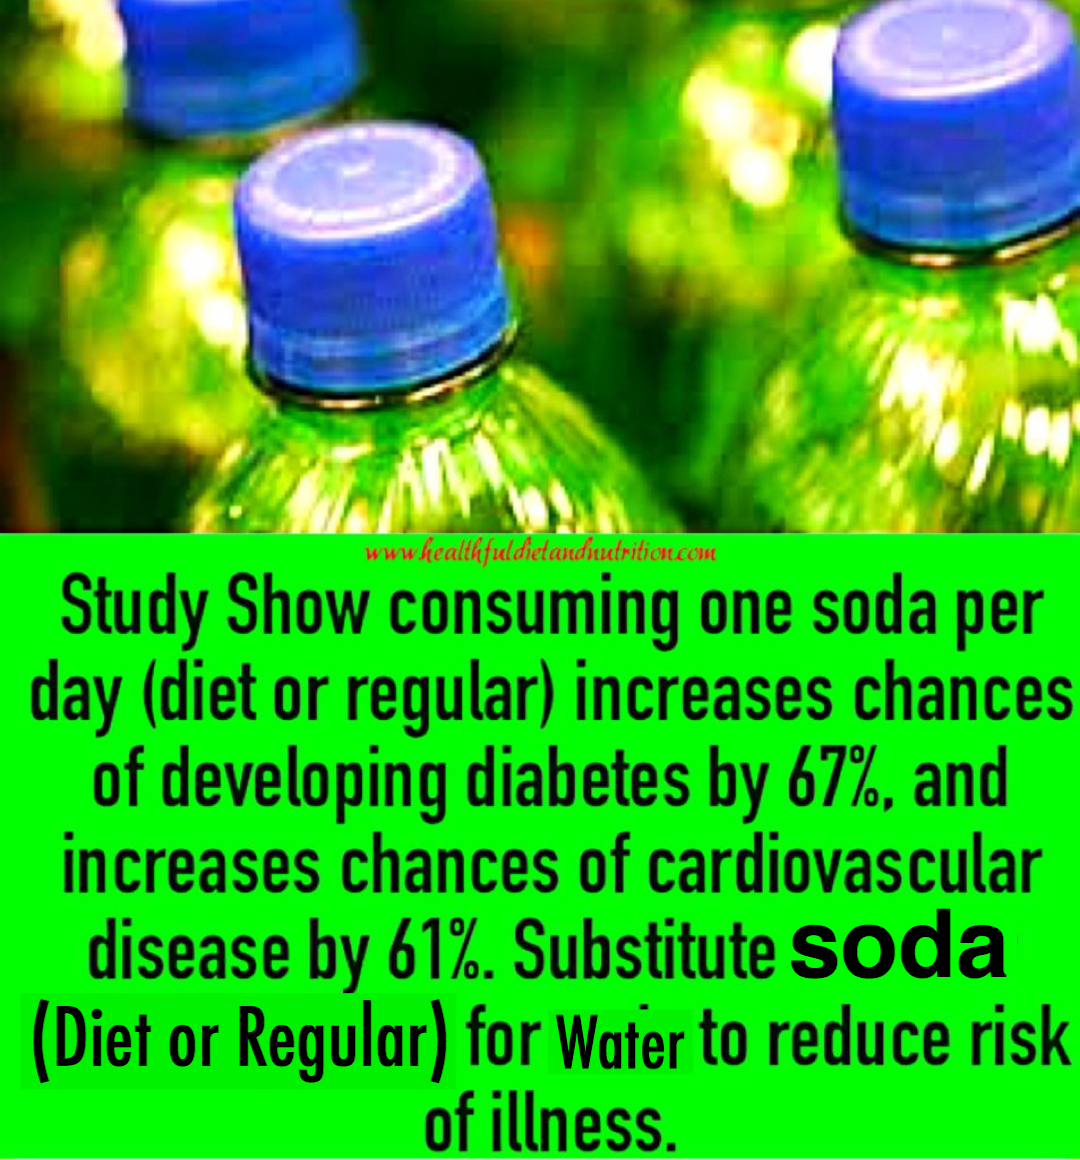 Substitute Soda For Water